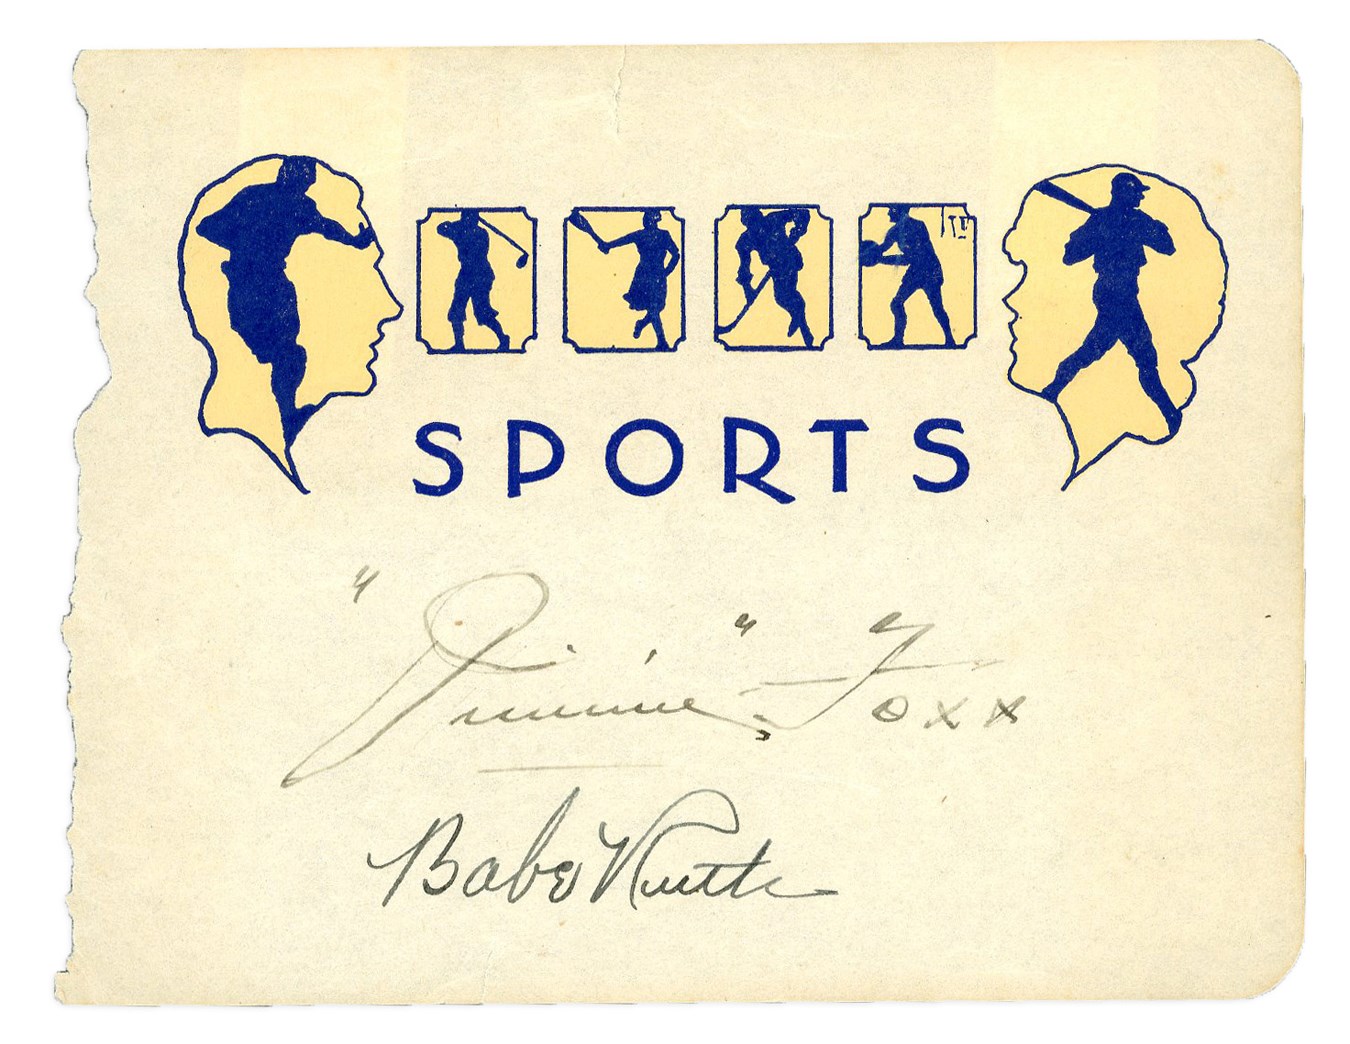 Baseball Autographs - Babe Ruth & Jimmie Foxx Dual-Signed Sports Album Page - First Two 500 Home Run Hitters (PSA/DNA)